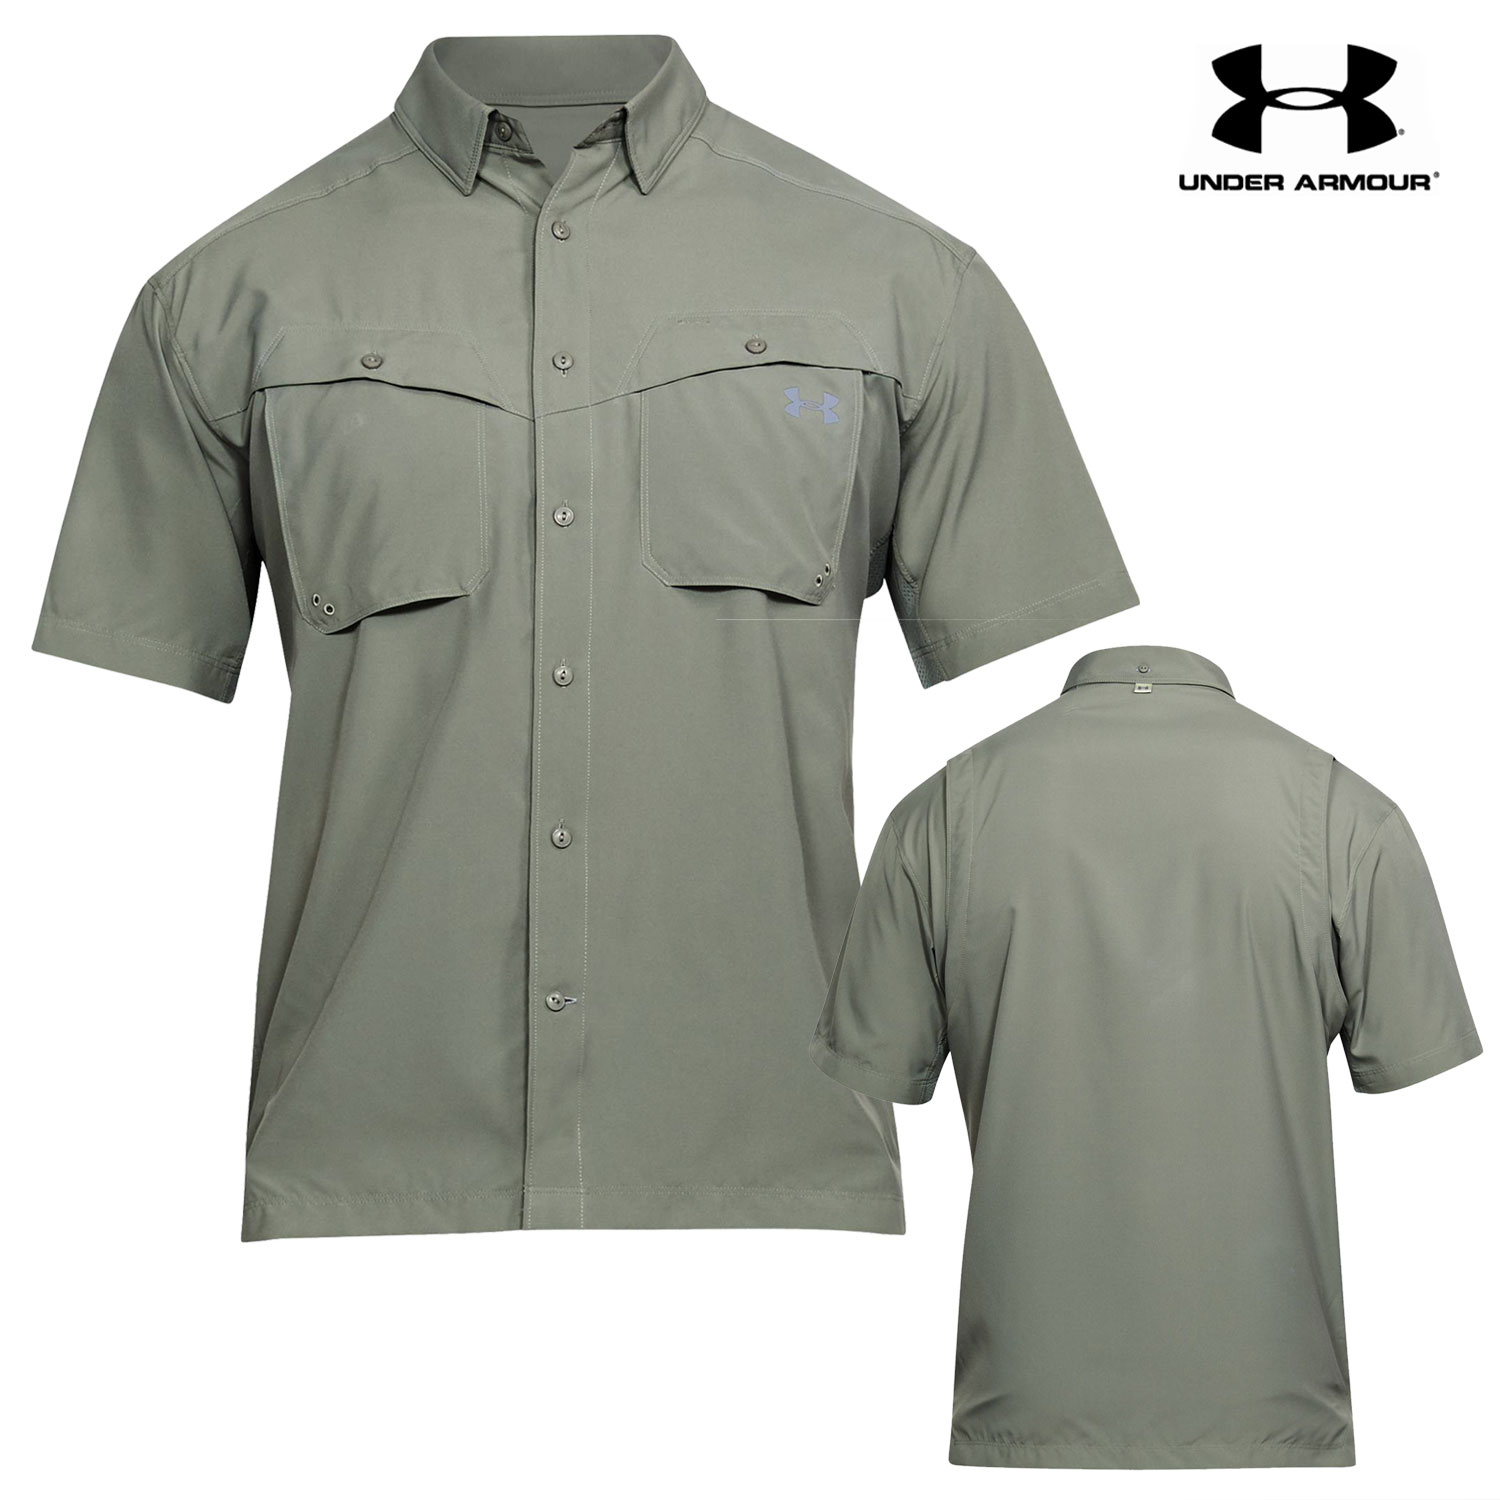 Under Armour Tide Chaser Short-Sleeve Fishing Shirt (S)